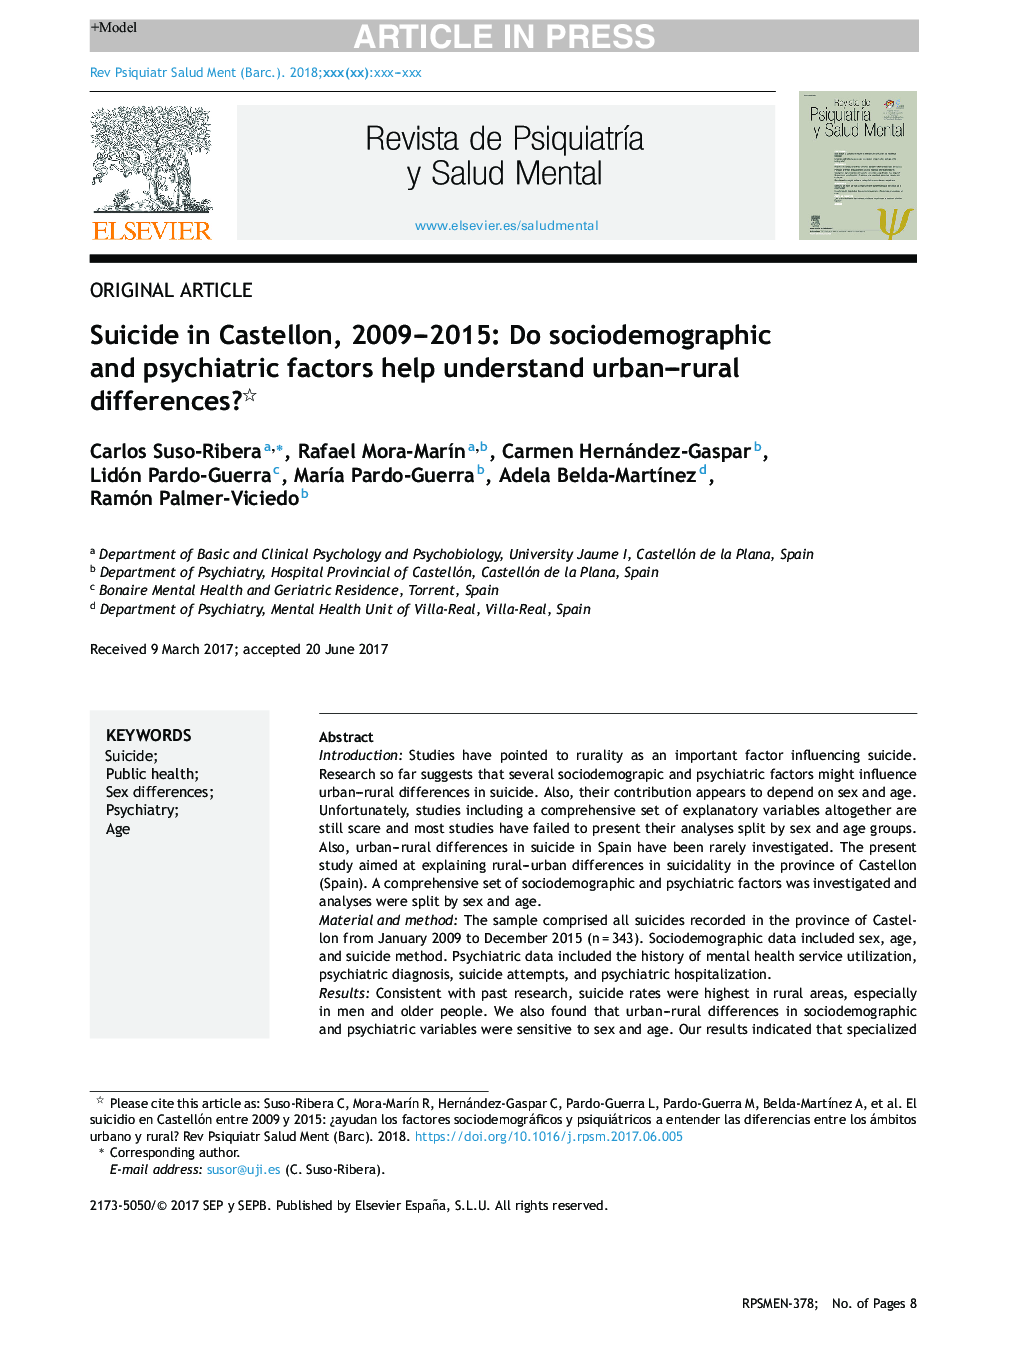 Suicide in Castellon, 2009-2015: Do sociodemographic and psychiatric factors help understand urban-rural differences?